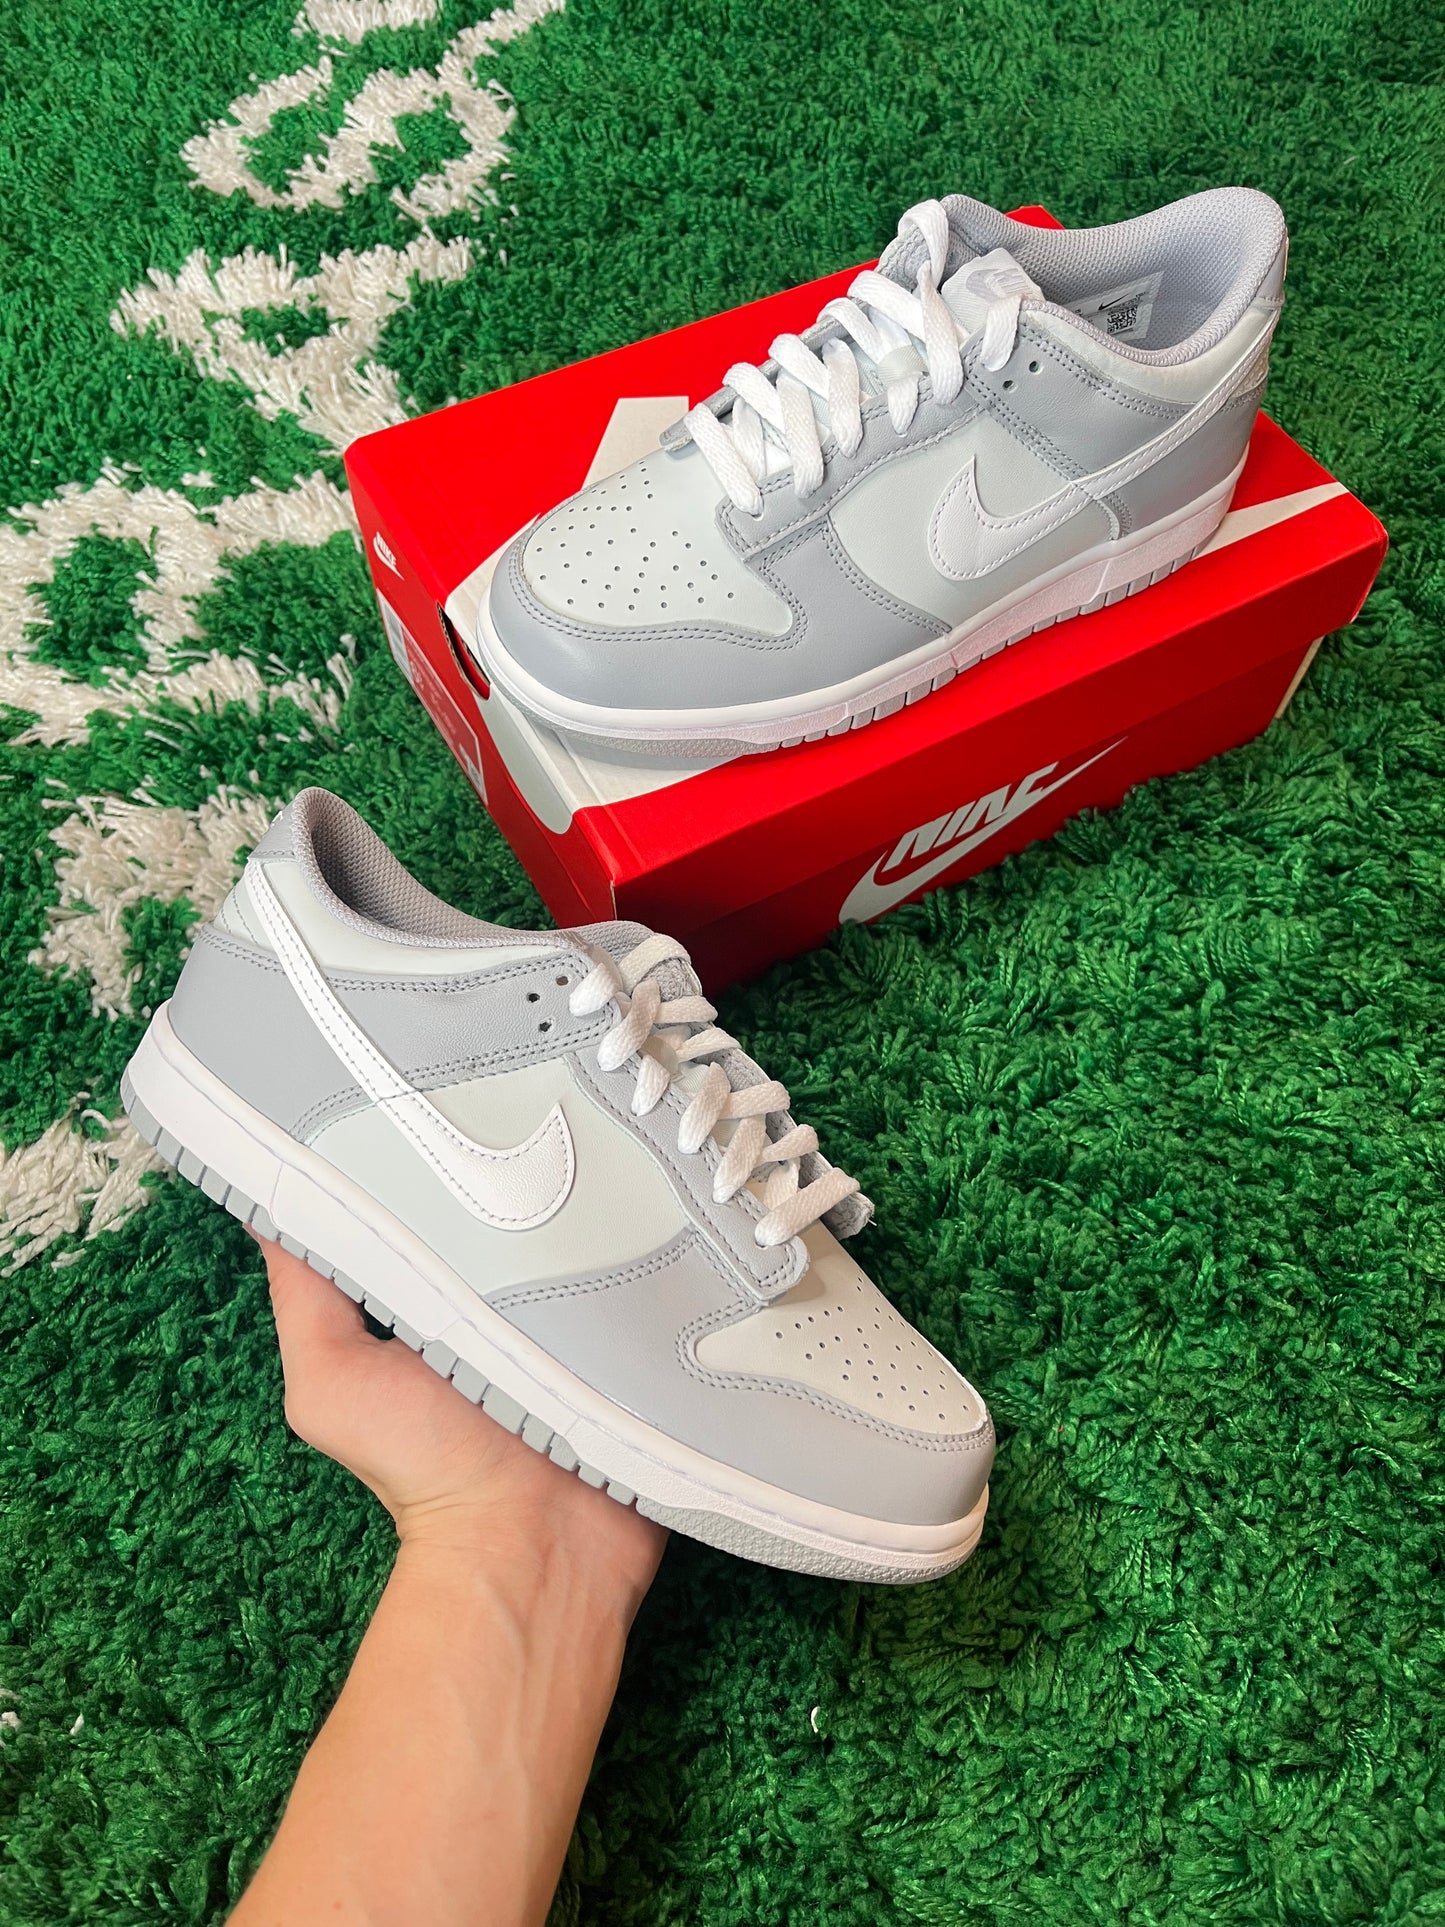 Nike Dunk “Two-Toned Grey”